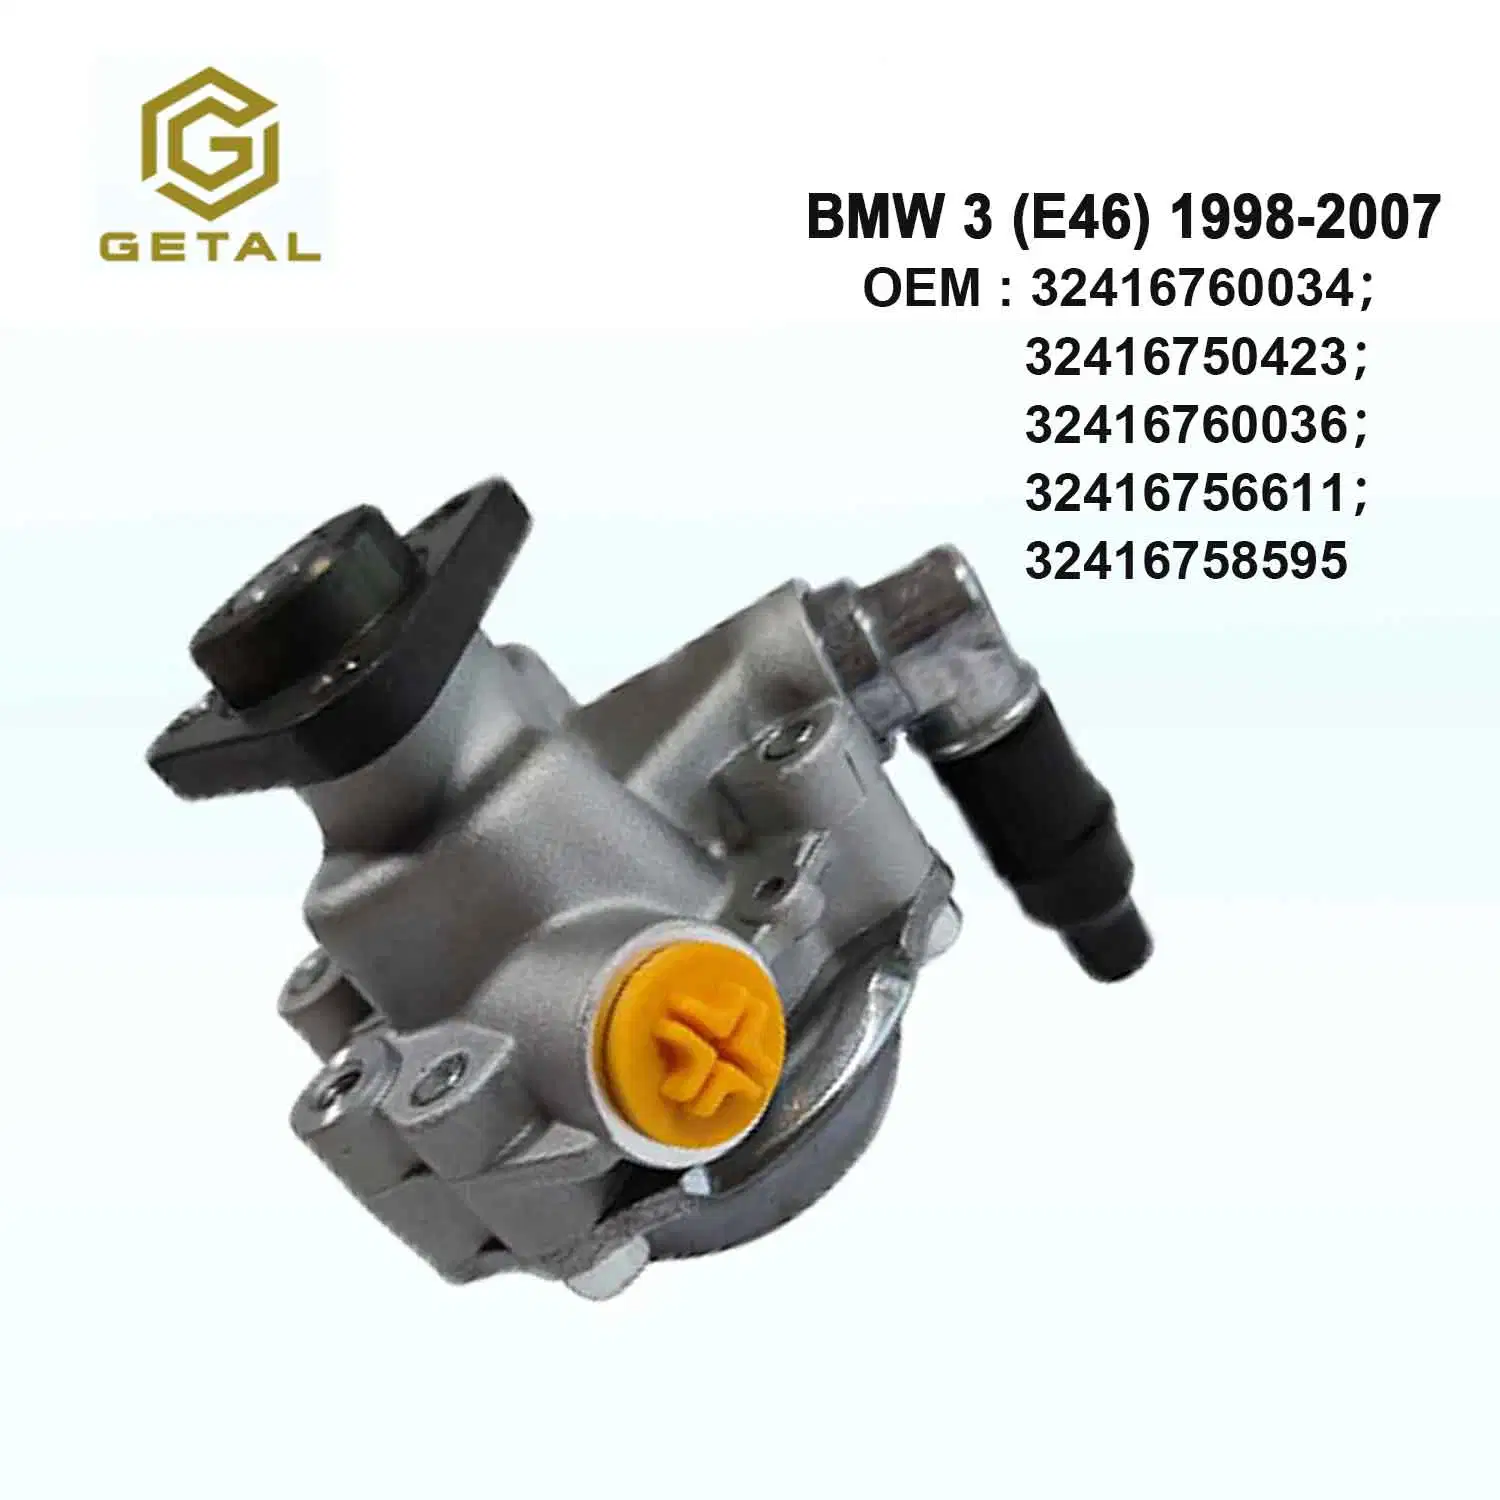 Auto Part Power Steering Pump for BMW E46 1998-2007 32416760034/32416750423/32416760036 /32416756611/32416758595